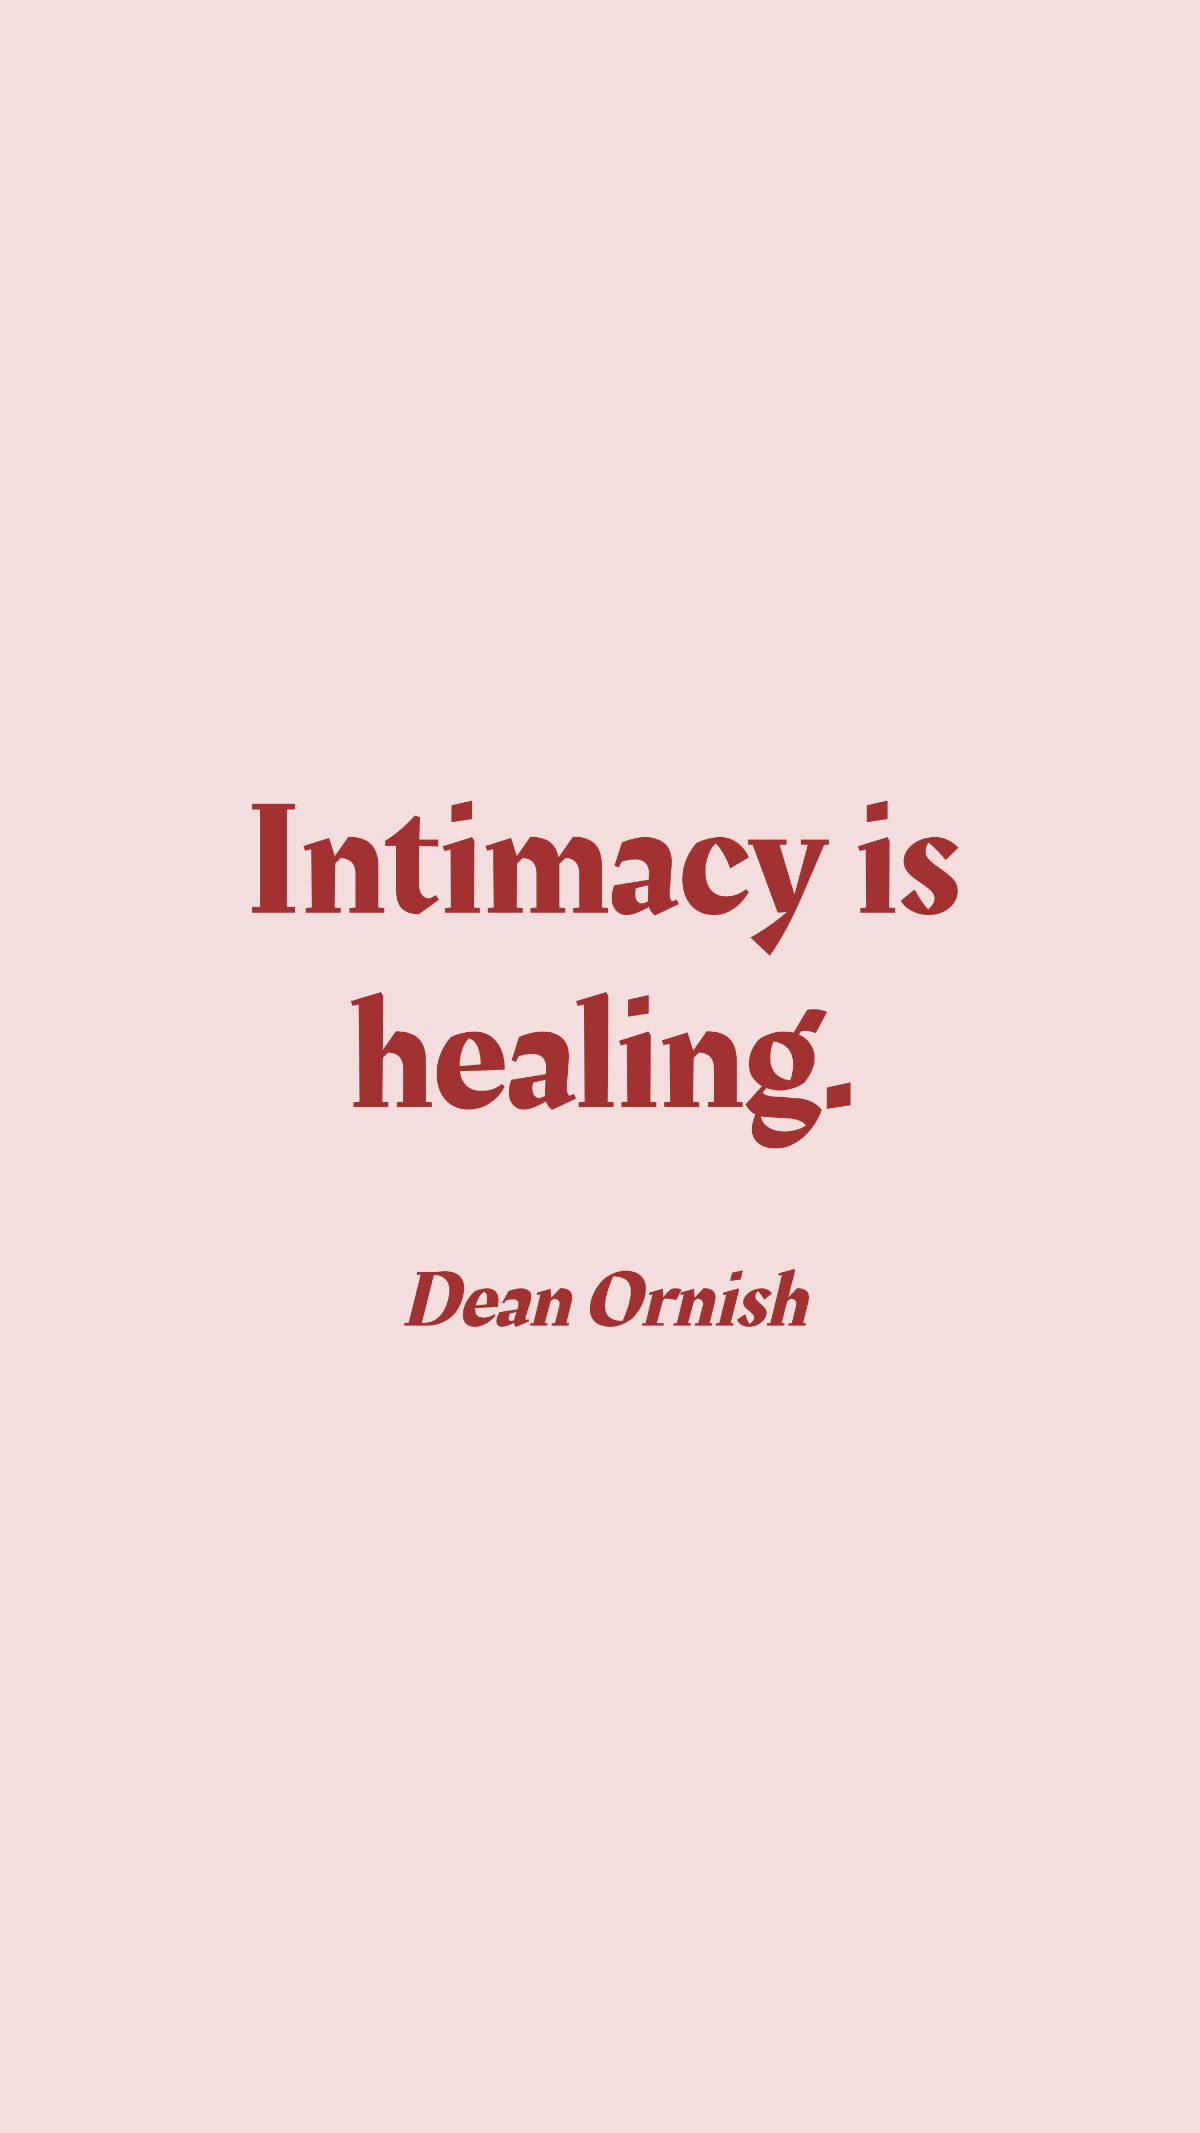 Free Dean Ornish - Intimacy is healing. Template